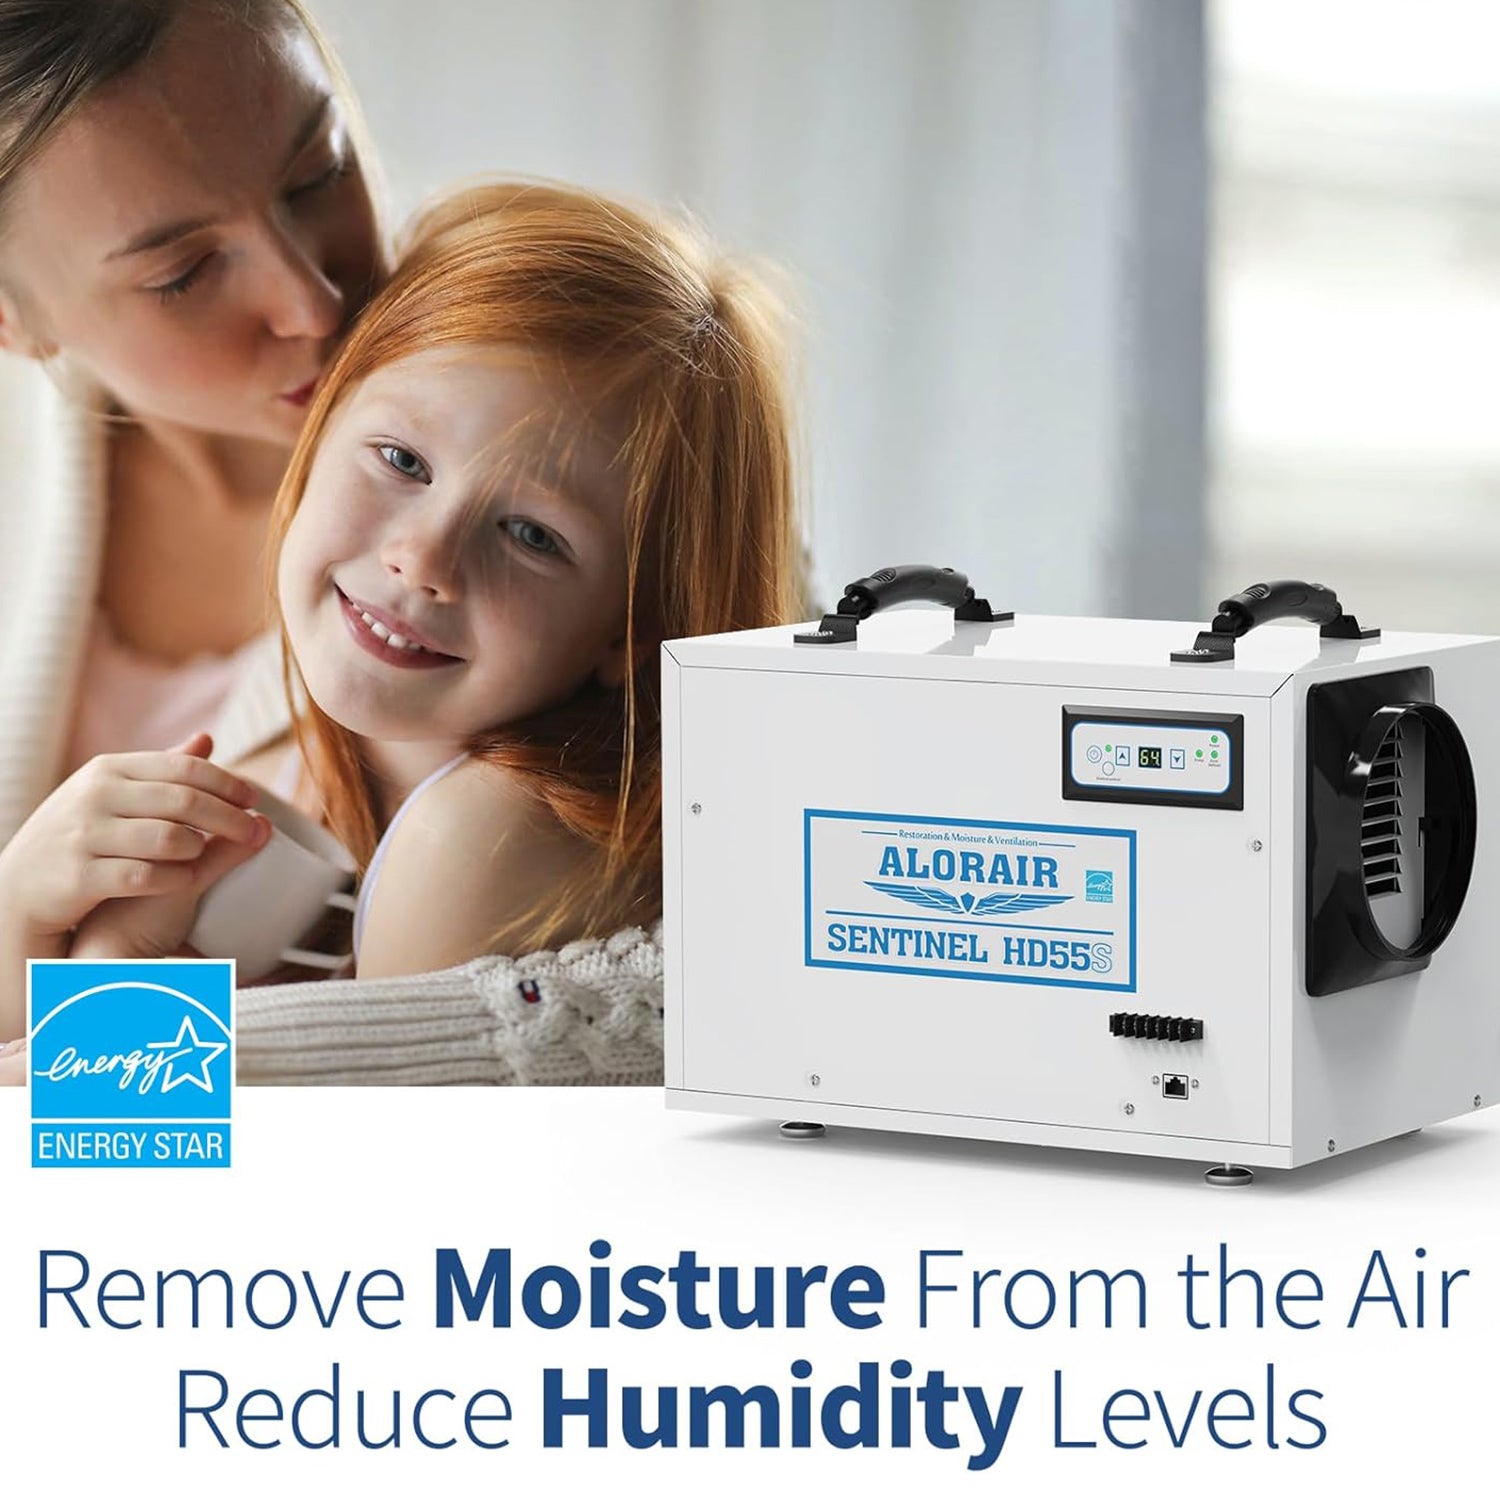 Remove moisture from the air and reduce humidity levels